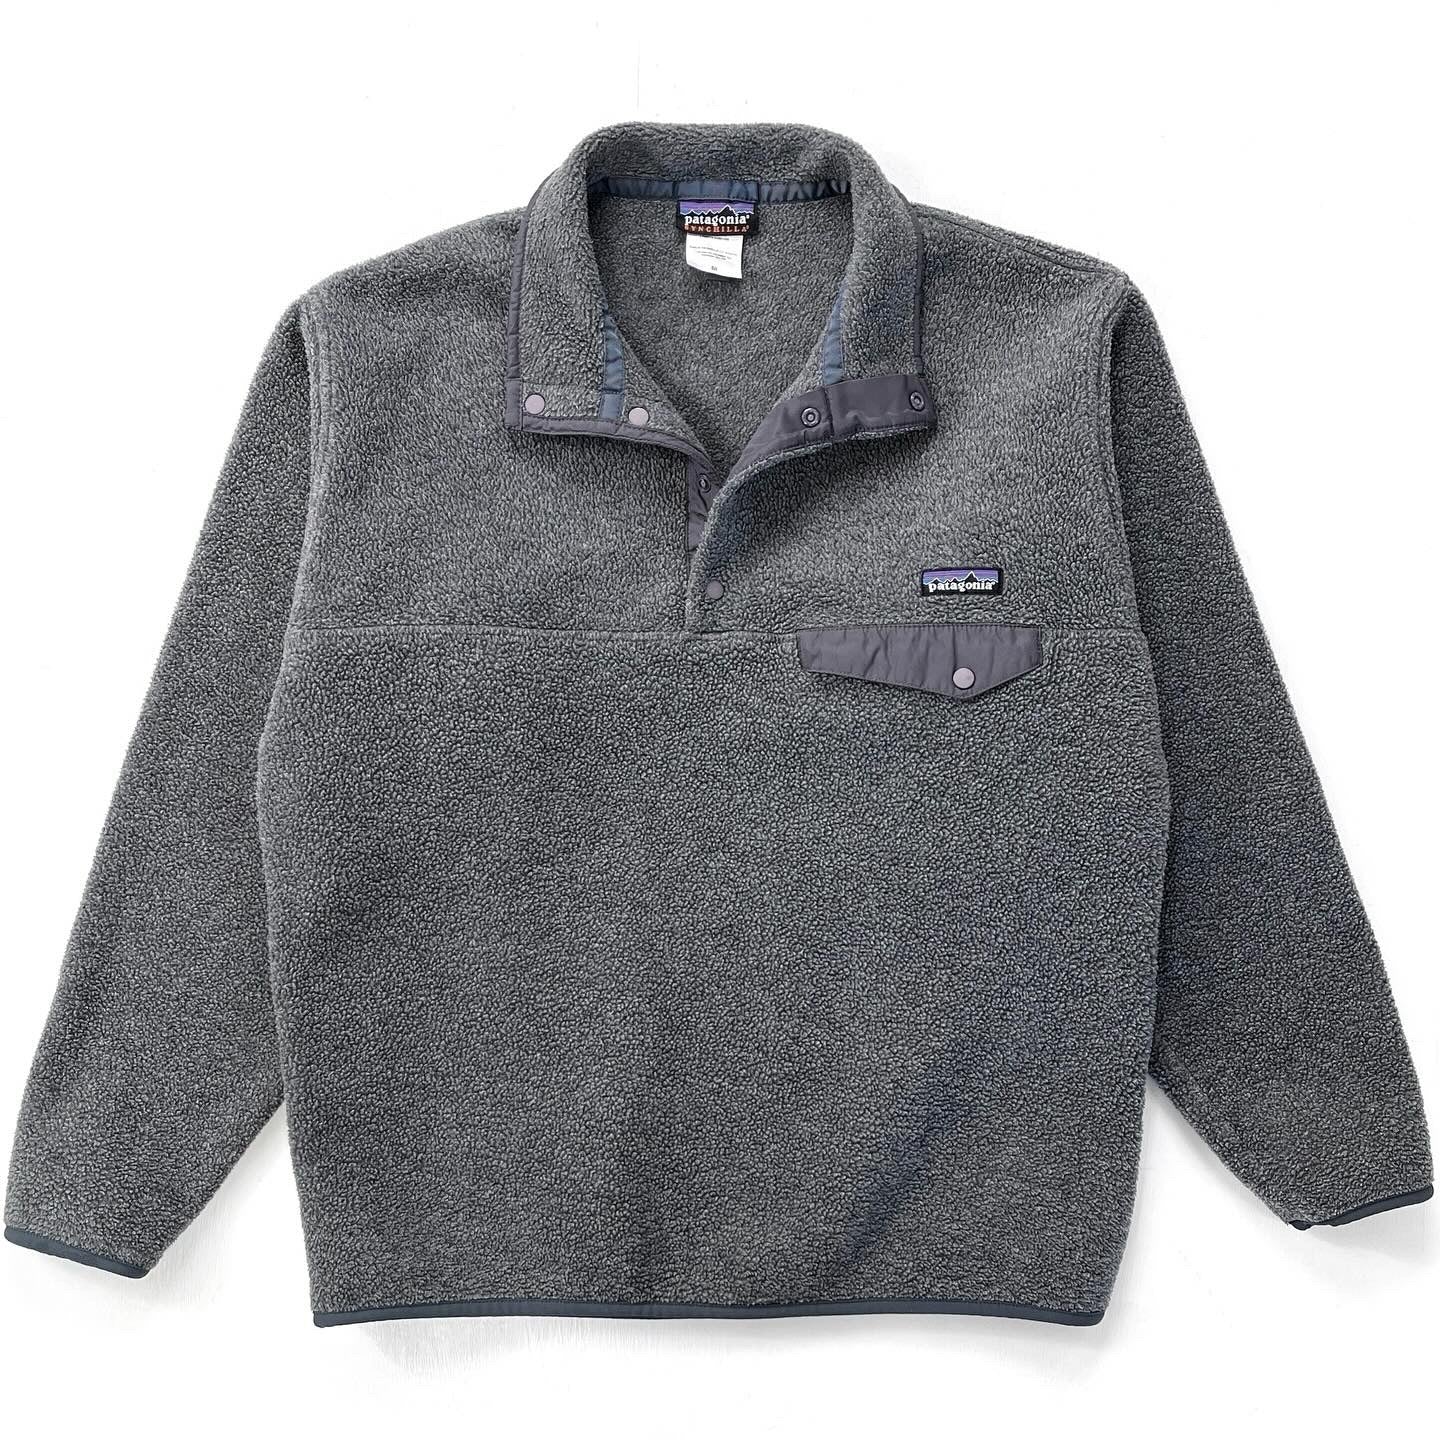 2005 Patagonia Synchilla Snap-T Pullover, Charcoal Heather (M)